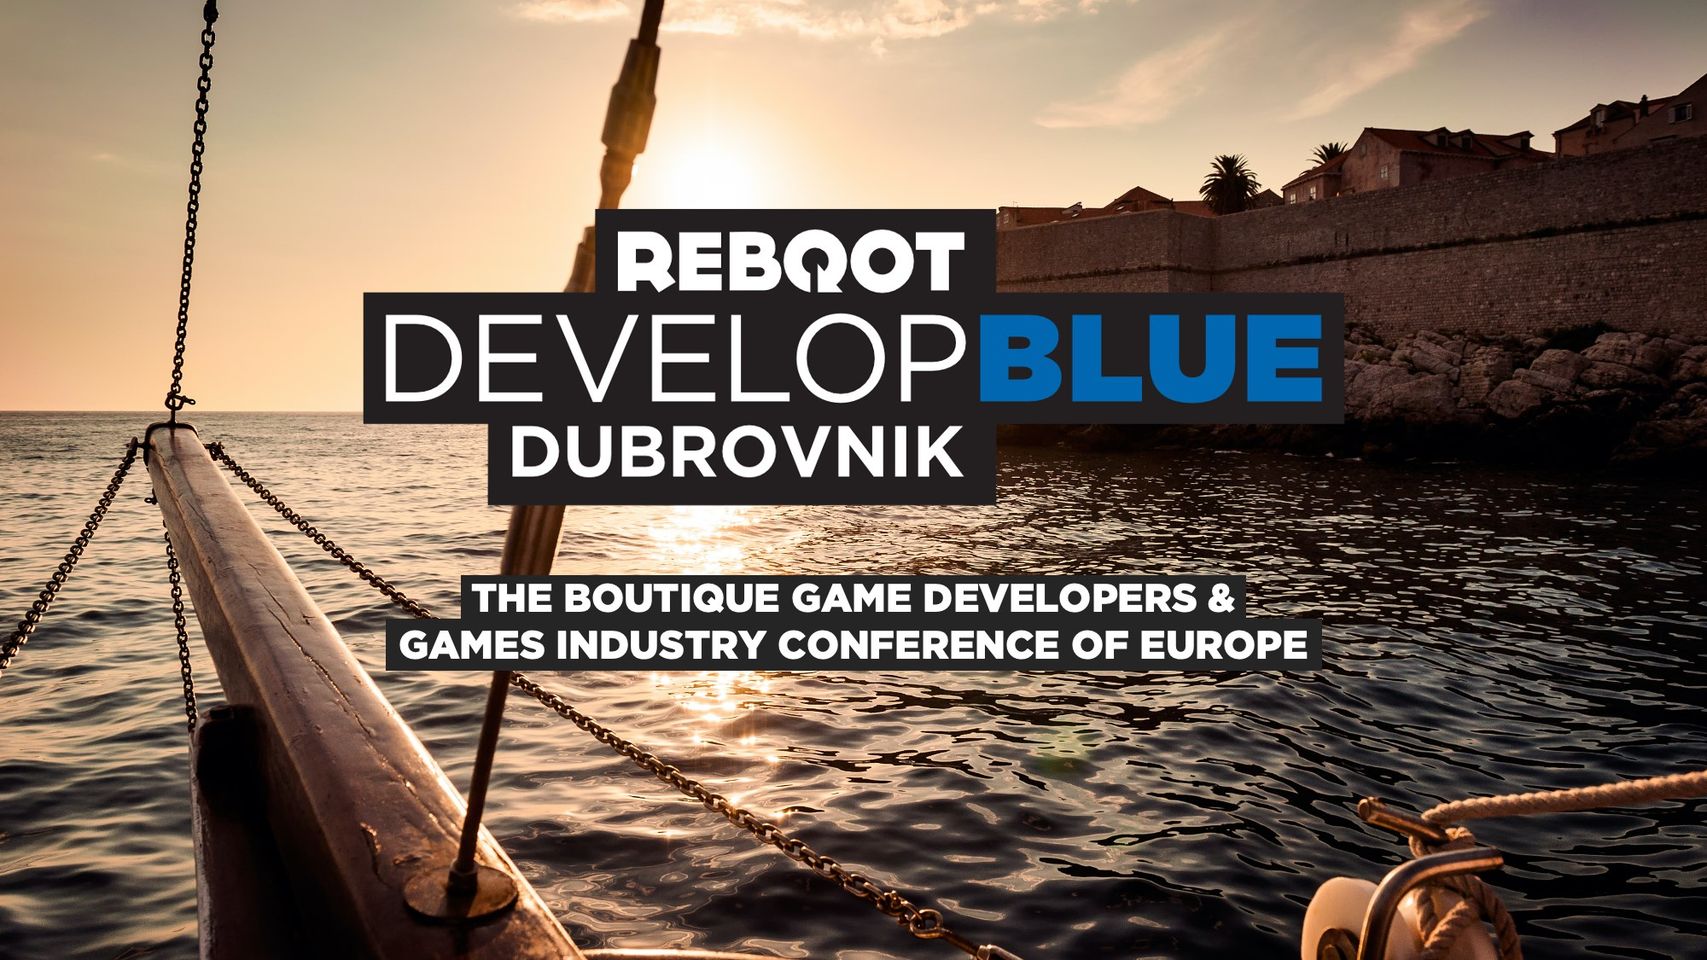 Image for Reboot Develop Blue delayed to April 2021